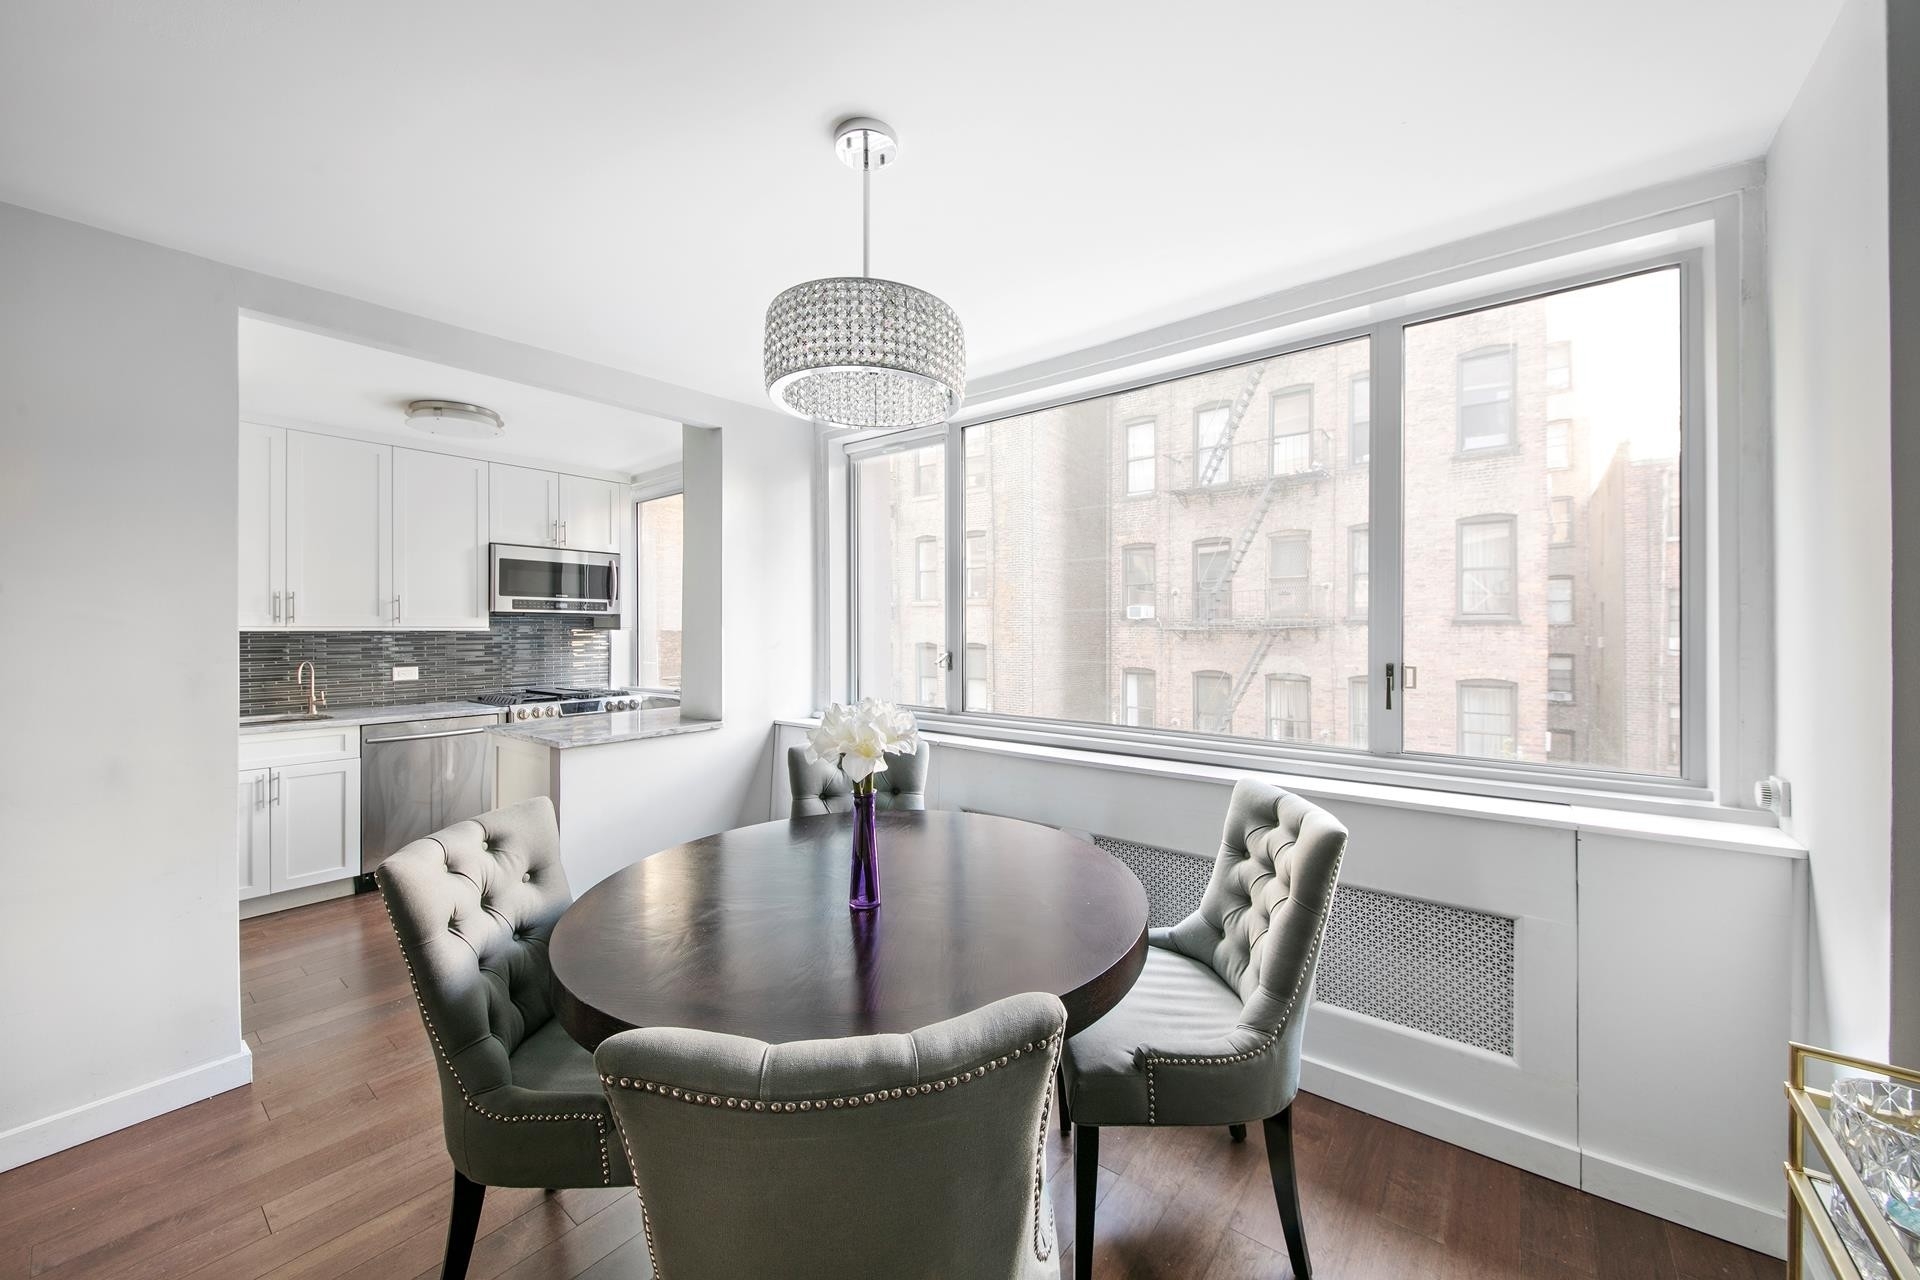 Co-op Properties for Sale at 333 E 14TH ST, 3B Gramercy Park, New York, New York 10003